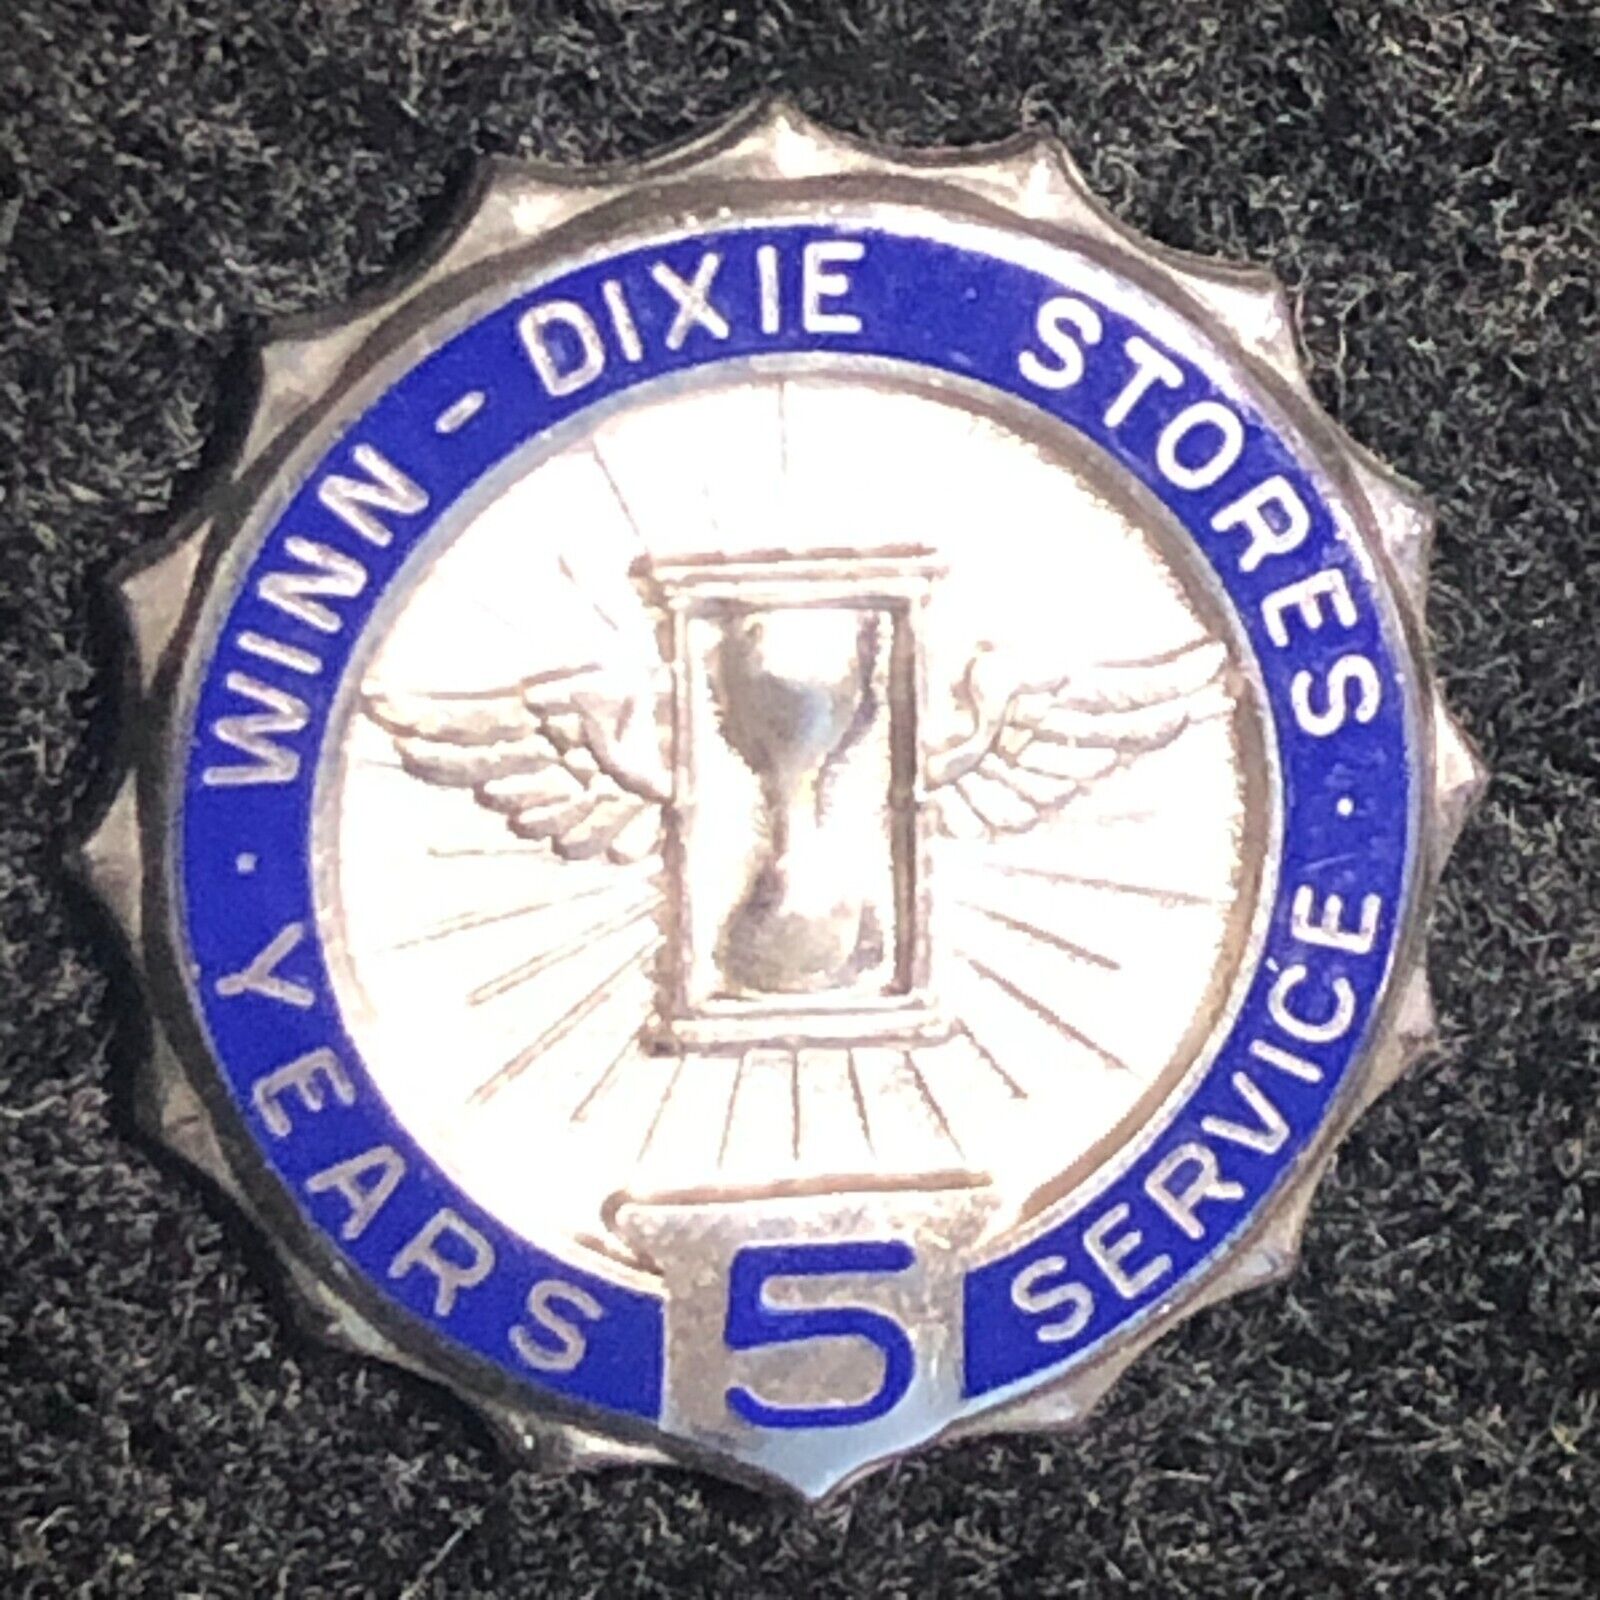 Vintage Winn - Dixie Stores 5 Years Service Lapel Pinback w/ Hourglass Sterling